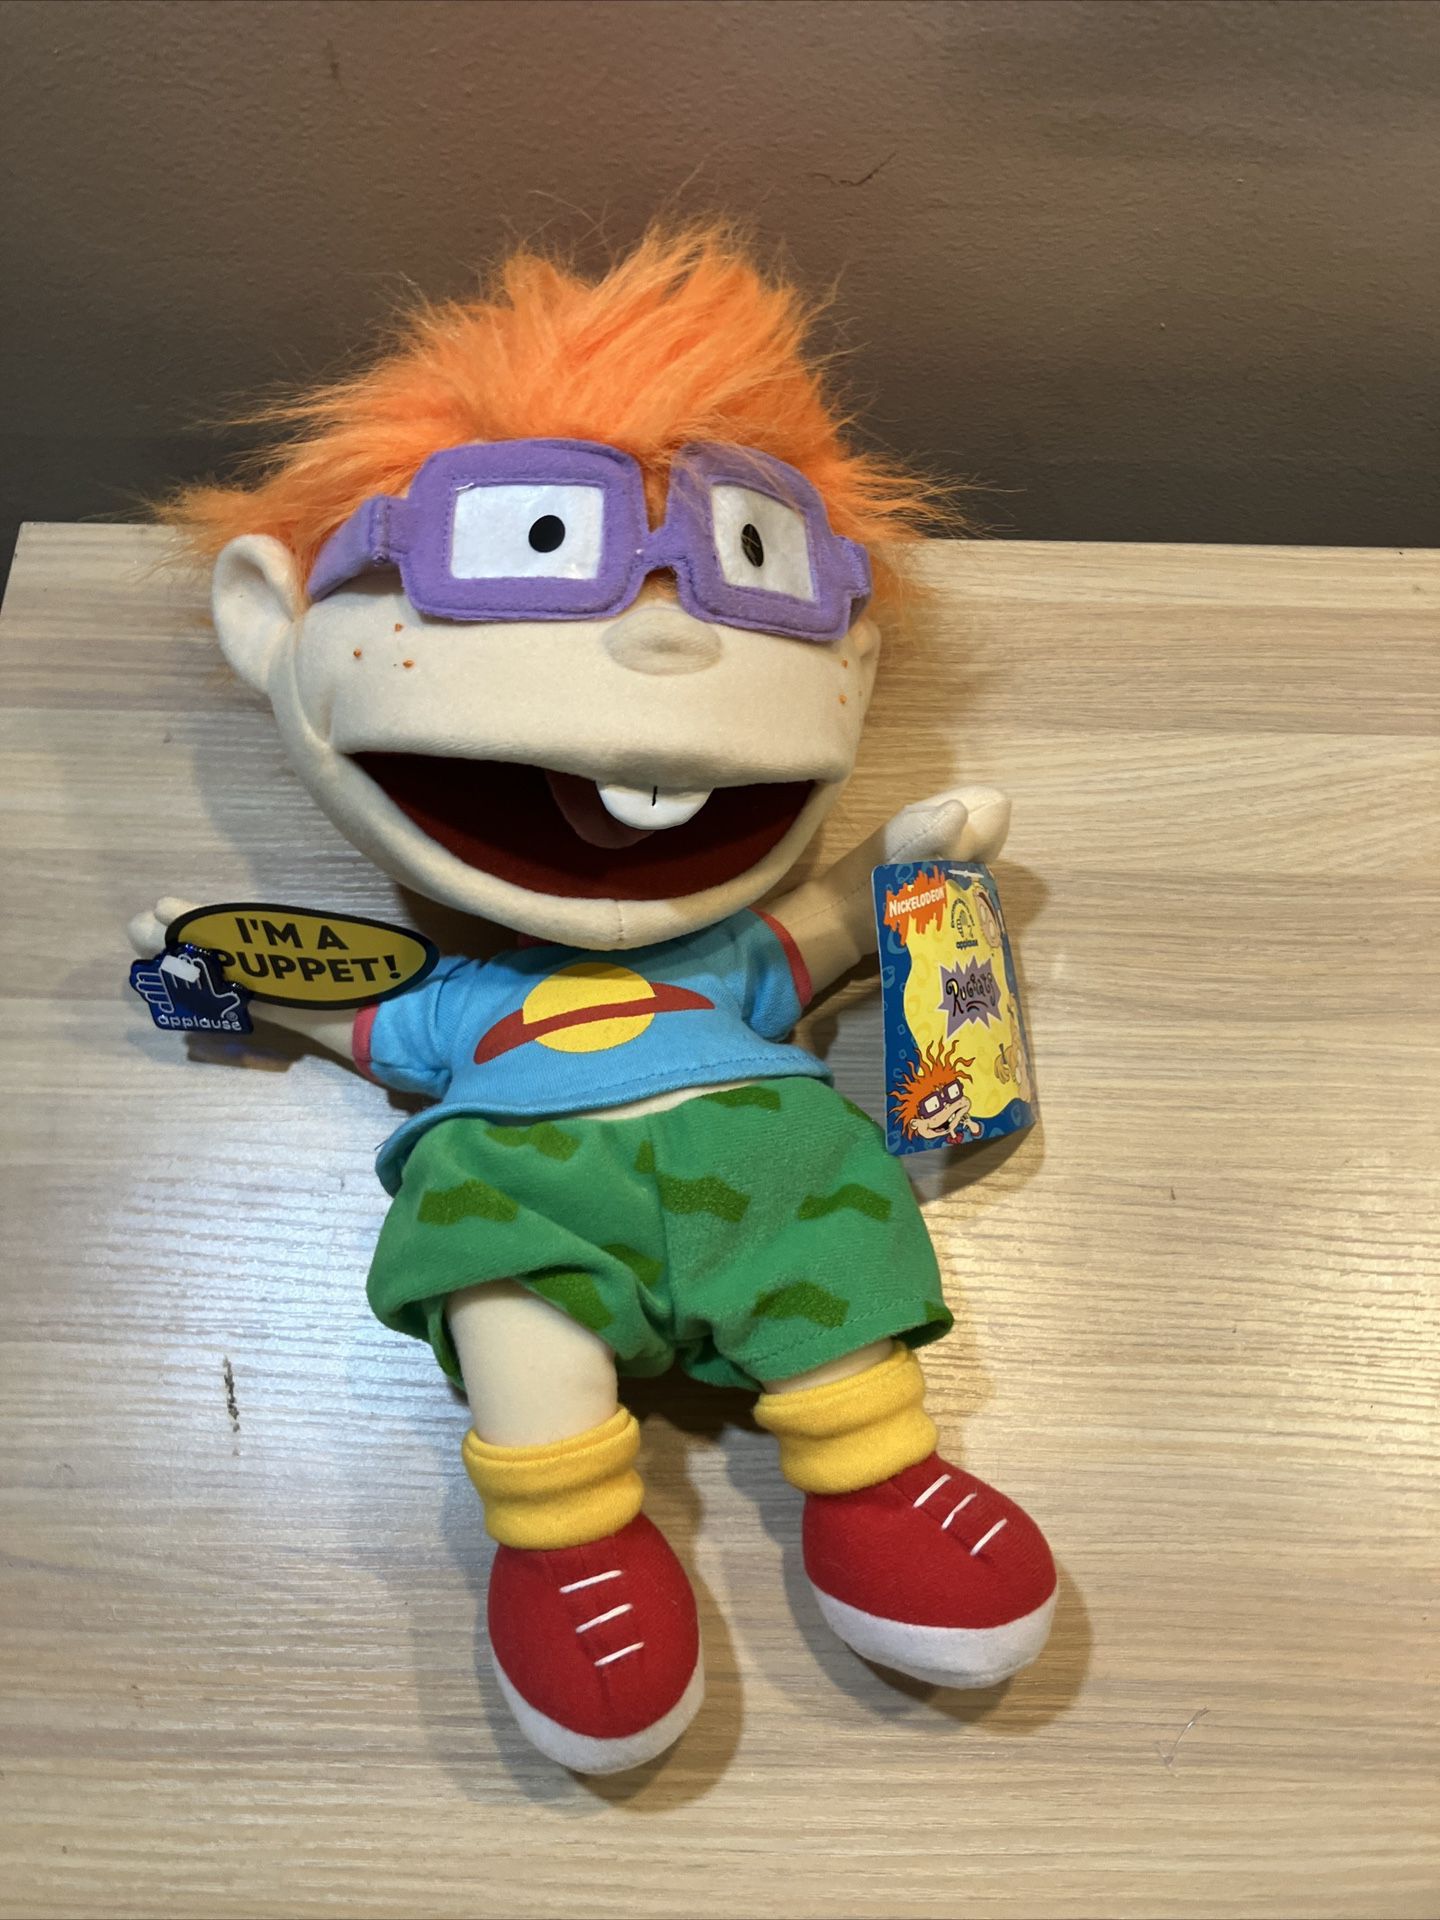 VTG Rugrats Chucky Puppet Doll Plush w/ Tags Hook Applause Nickelodeon 1998